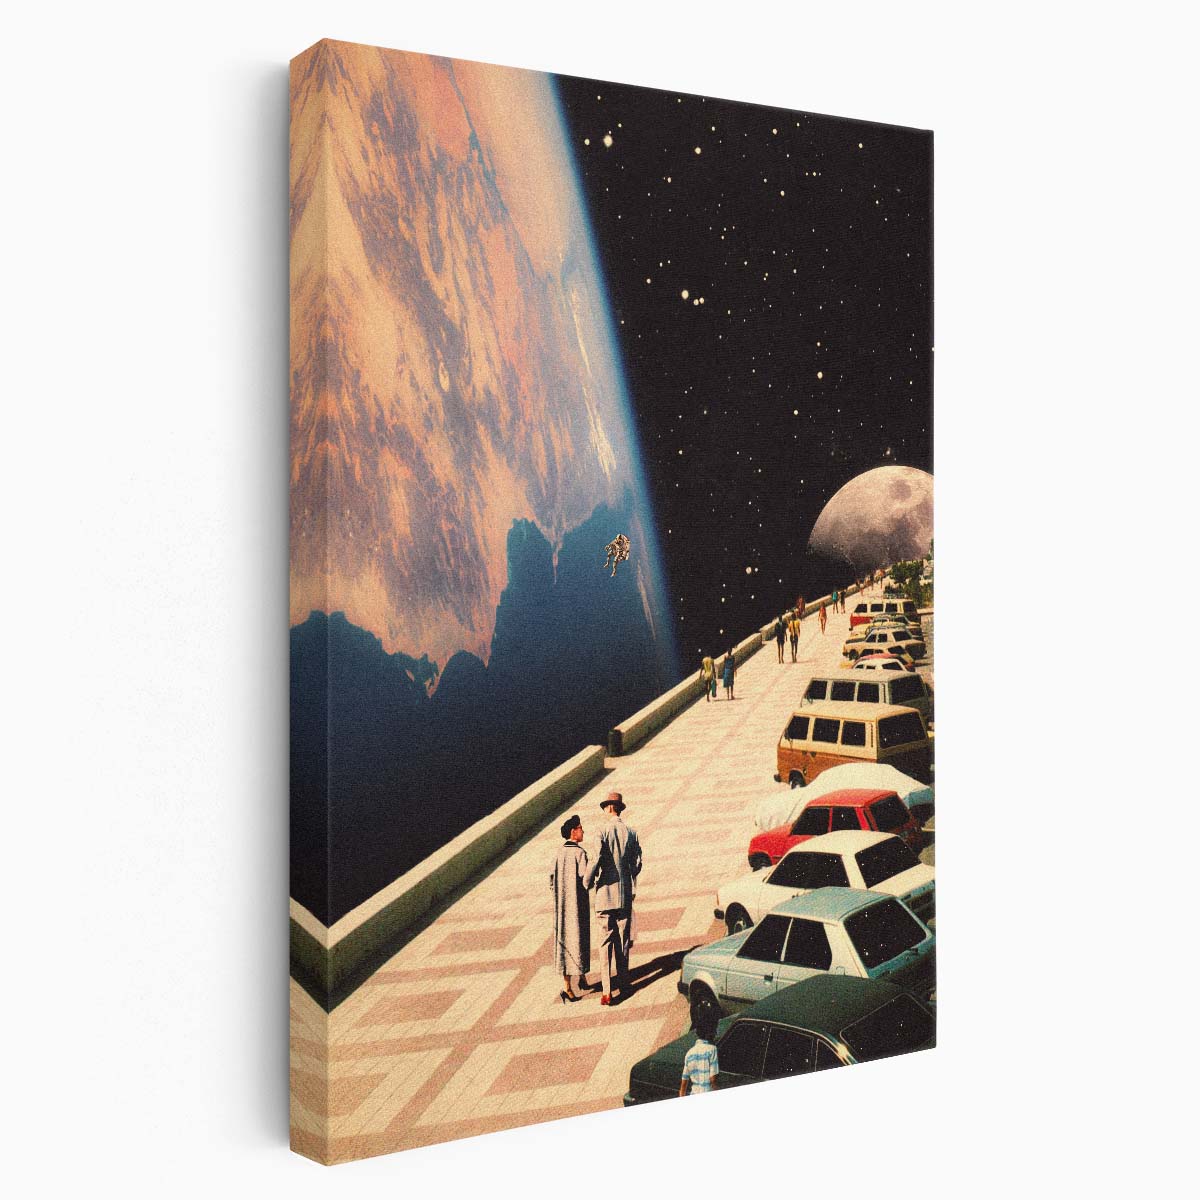 Surreal Space Collage Art - Retro Futuristic Adventure Illustration by Luxuriance Designs, made in USA